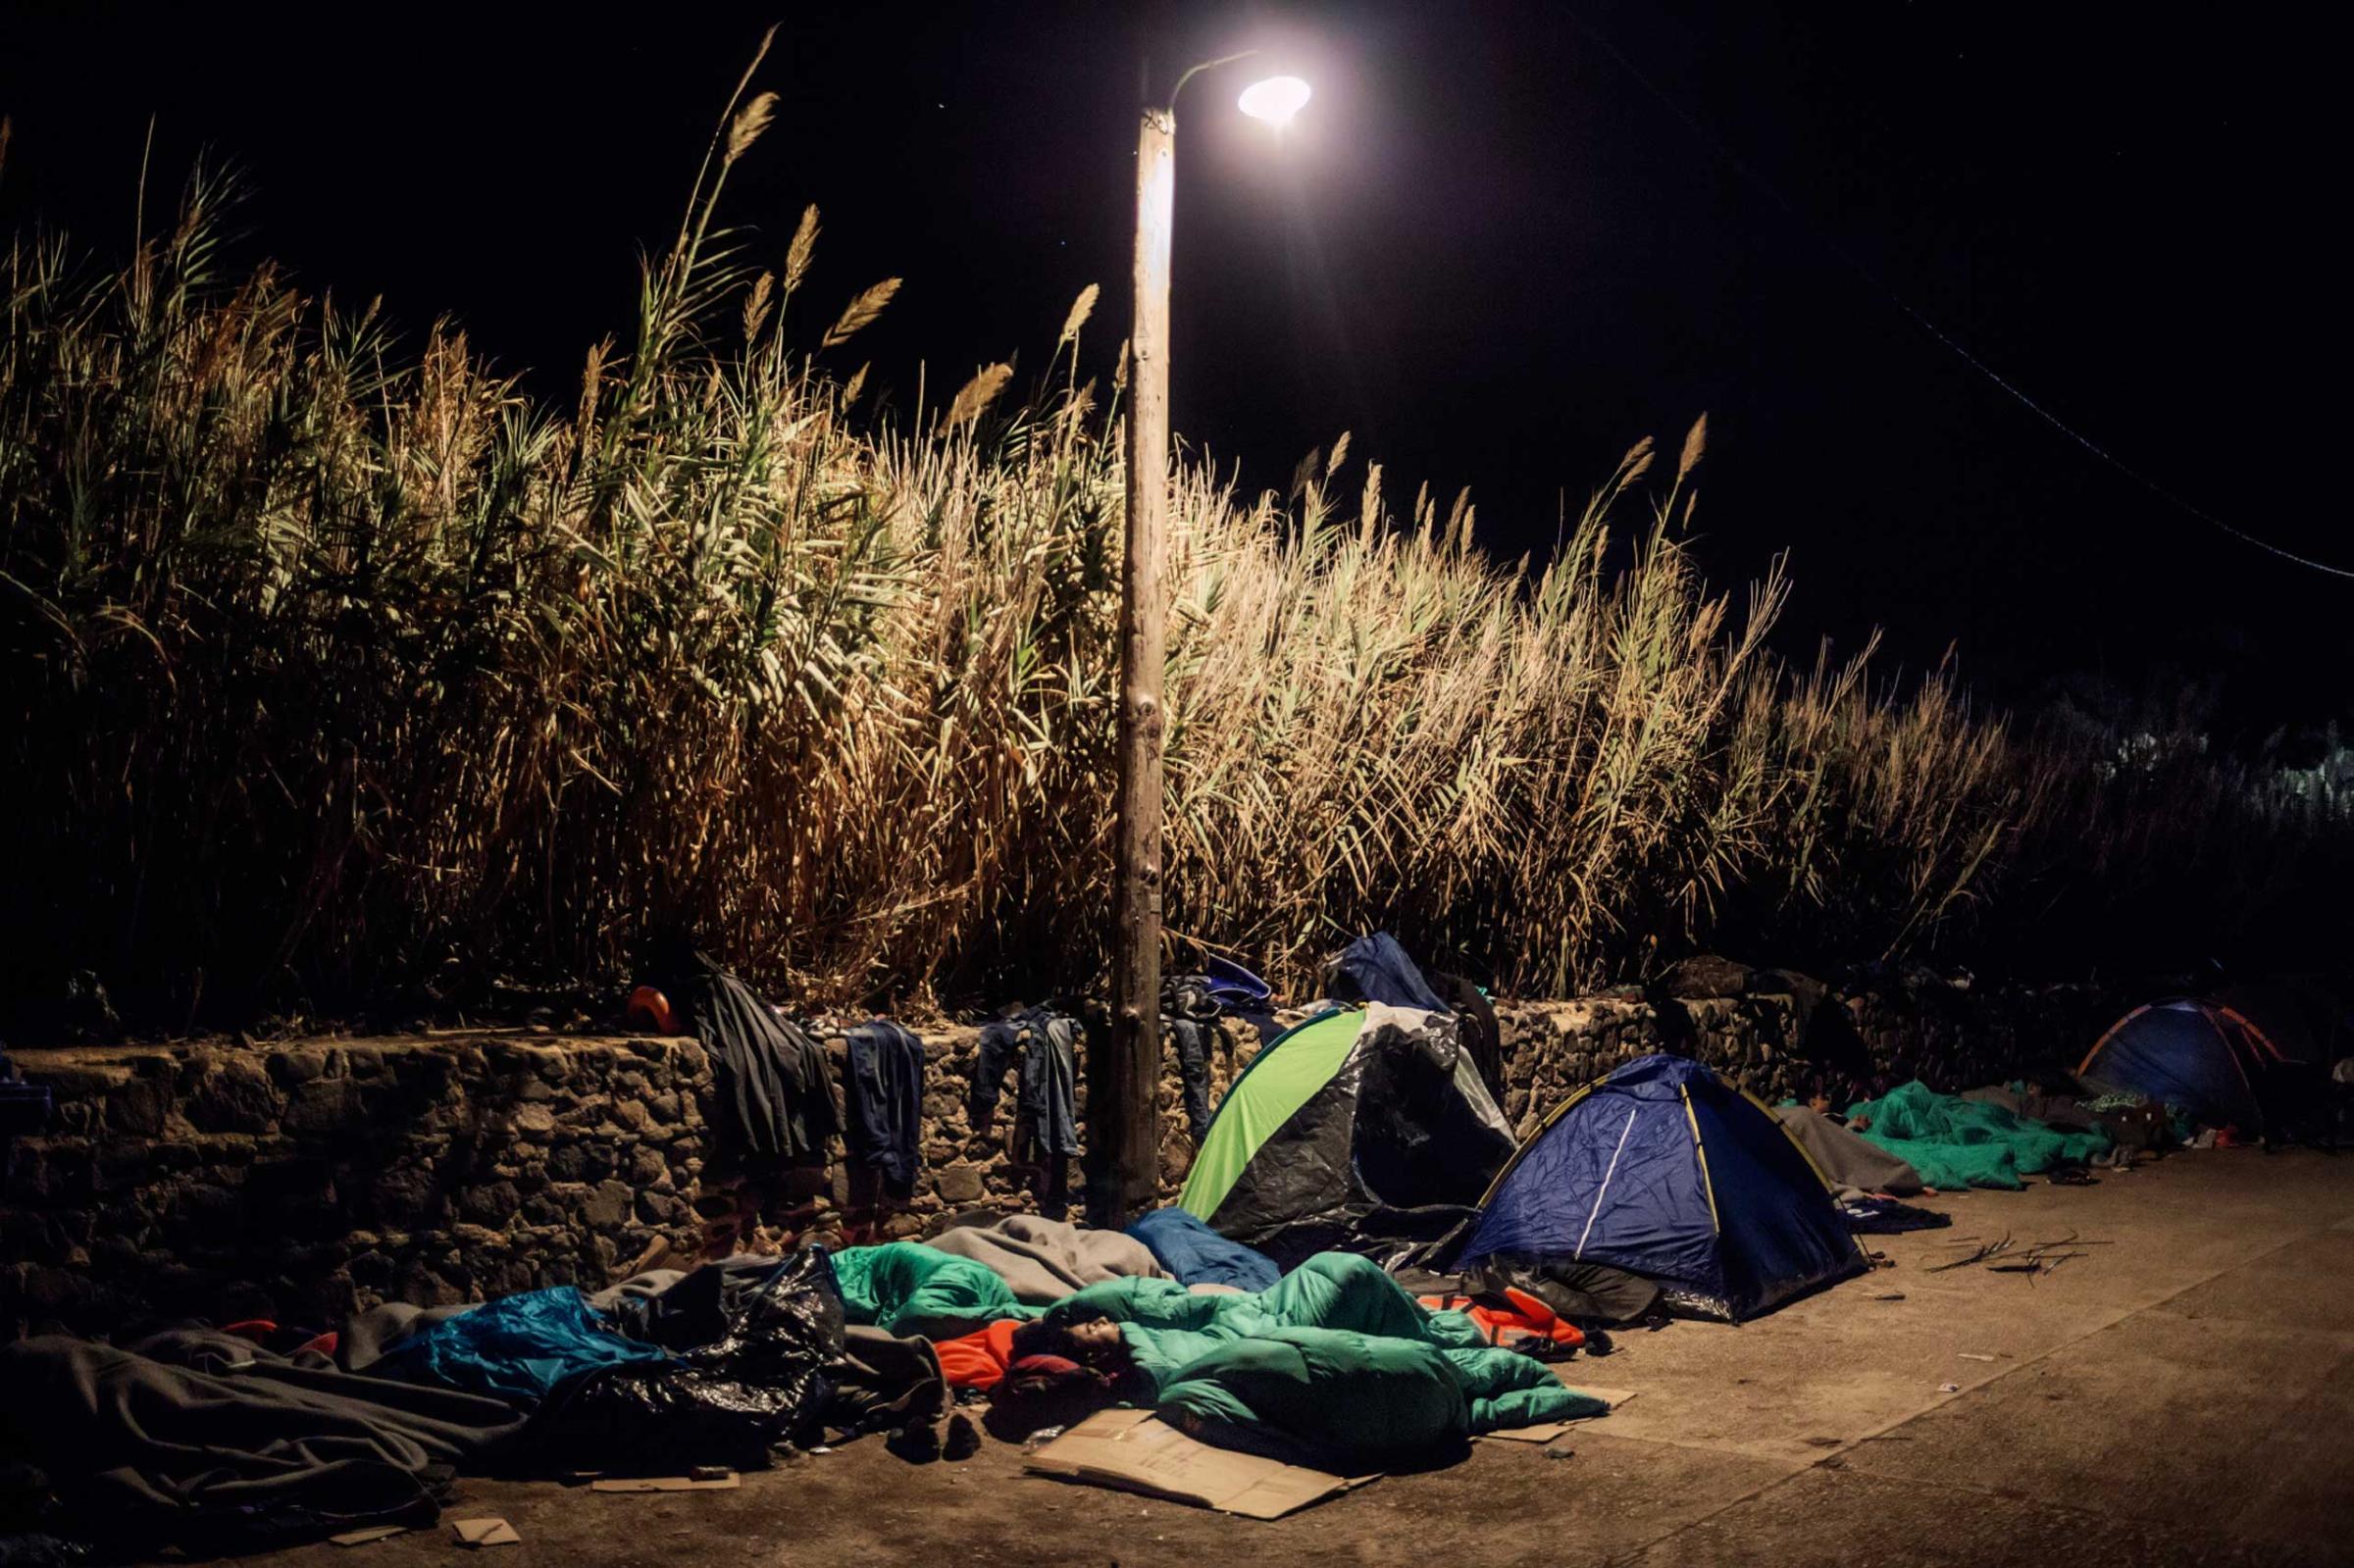 A group of Syrian migrants spend the night on the north of the Greek island of Lesbos, near the beach of Eftalou, where they landed just a few hours earlier, Oct. 16, 2015.